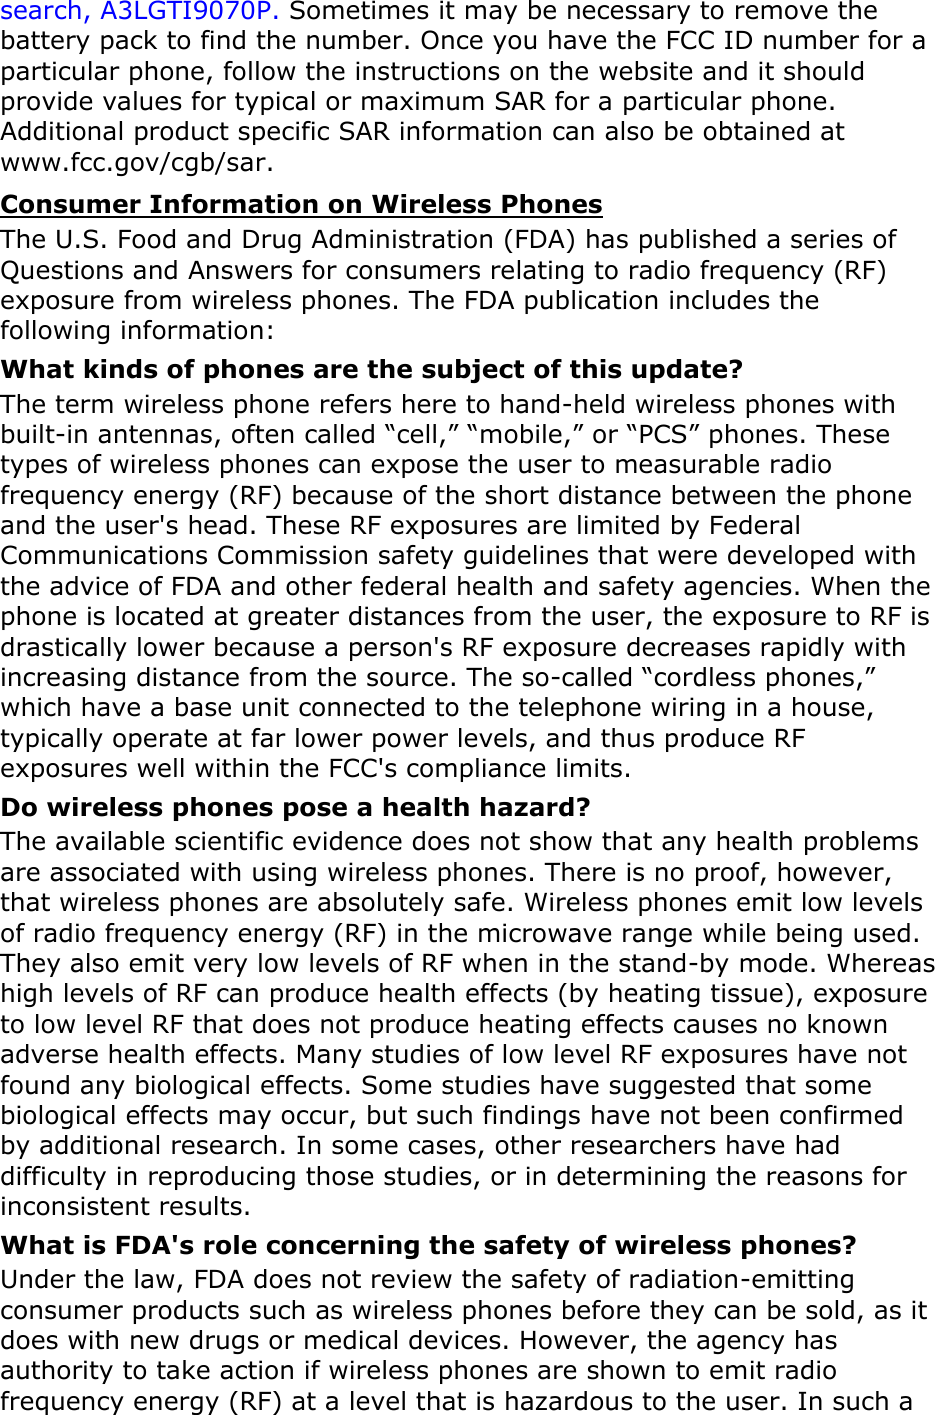 Page 8 of Samsung Electronics Co GTI9070P Cellular/PCS GSM/EDGE/WCDMA Phone with WLAN, RFID and Bluetooth User Manual